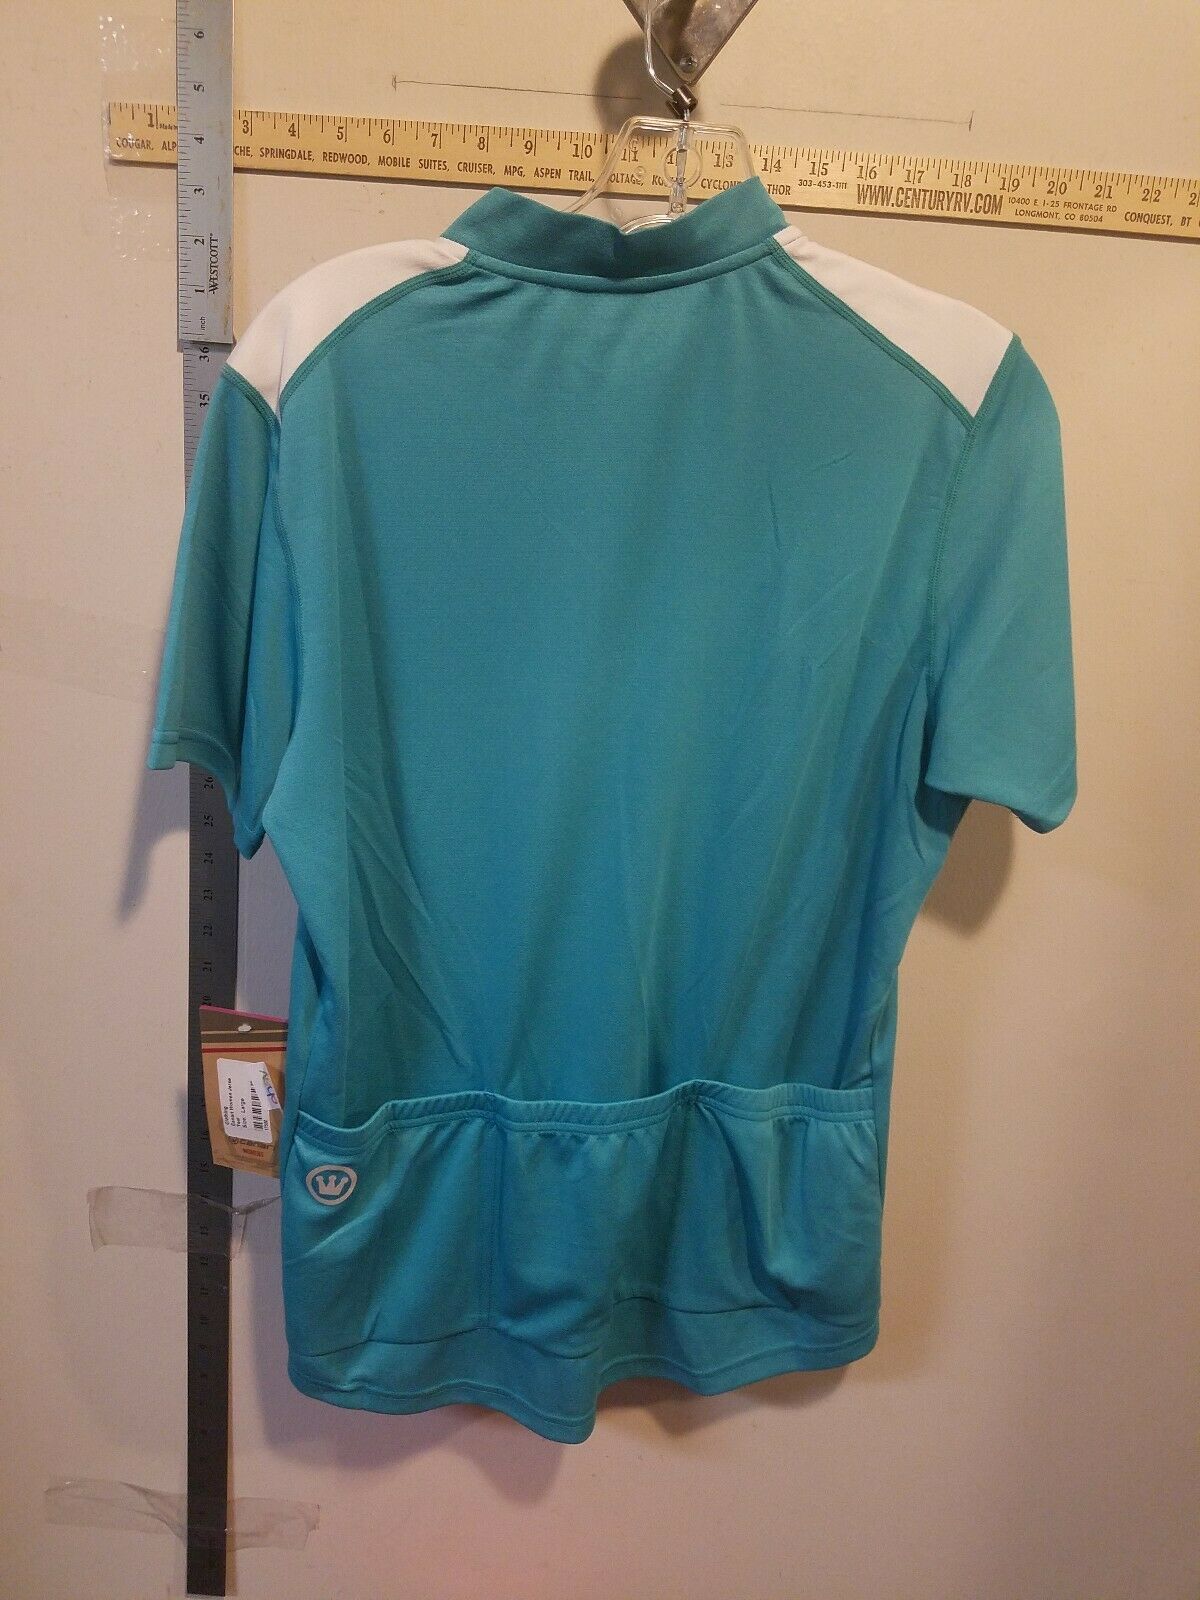 Canari Women's Bicycle Jersey Size Large Clearance